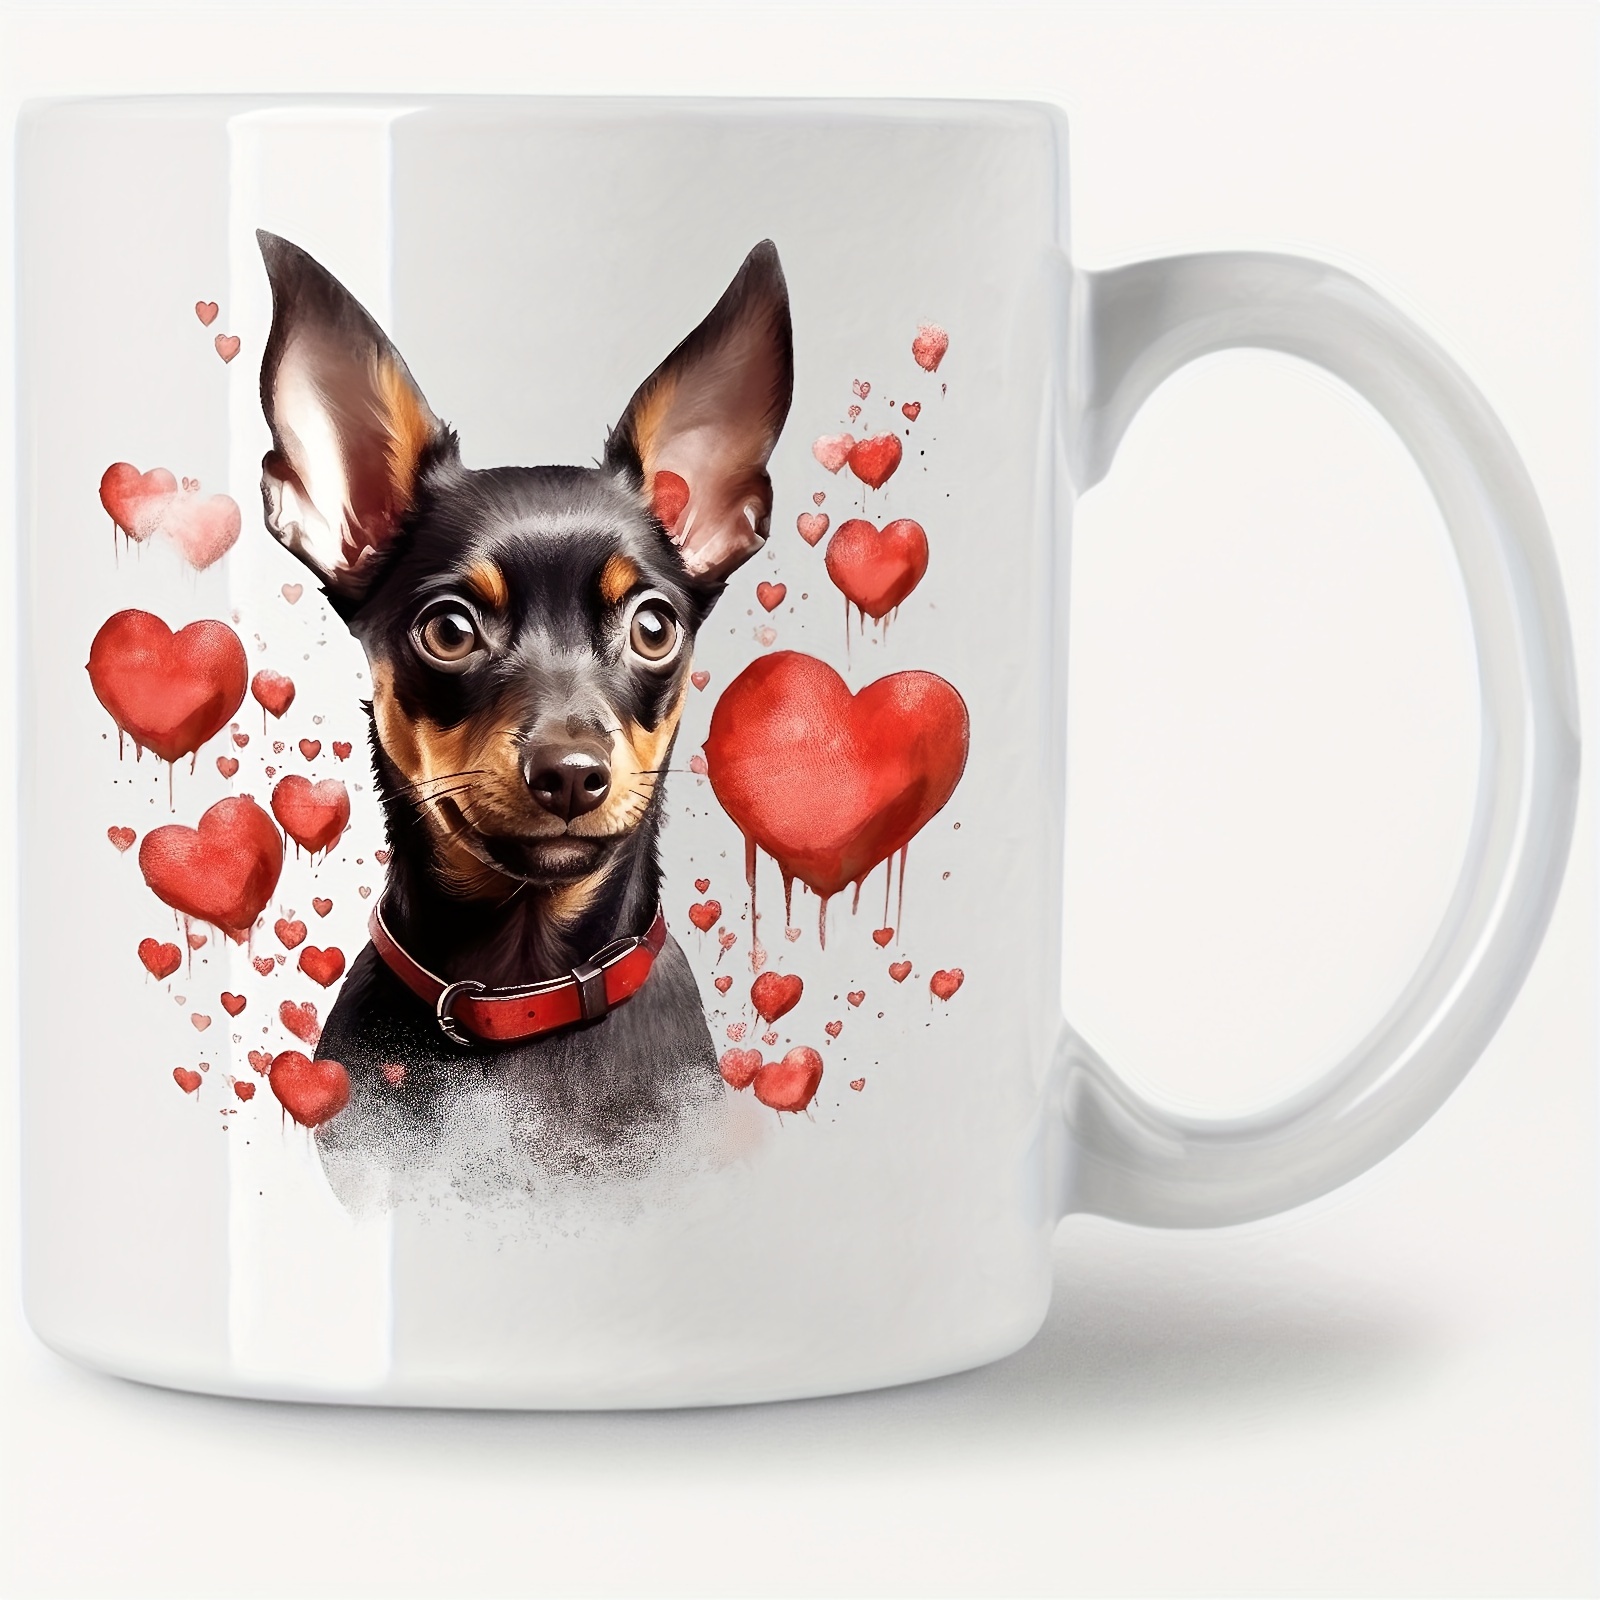 

1pc 11oz/330ml Mug For Cafe, Coffee Mug, Miniature Pinscher 2, Gift For Friends, Sisters, Colleagues, Family, Coffee Drinker, Owner, Ceramic Cup, Holiday Gift